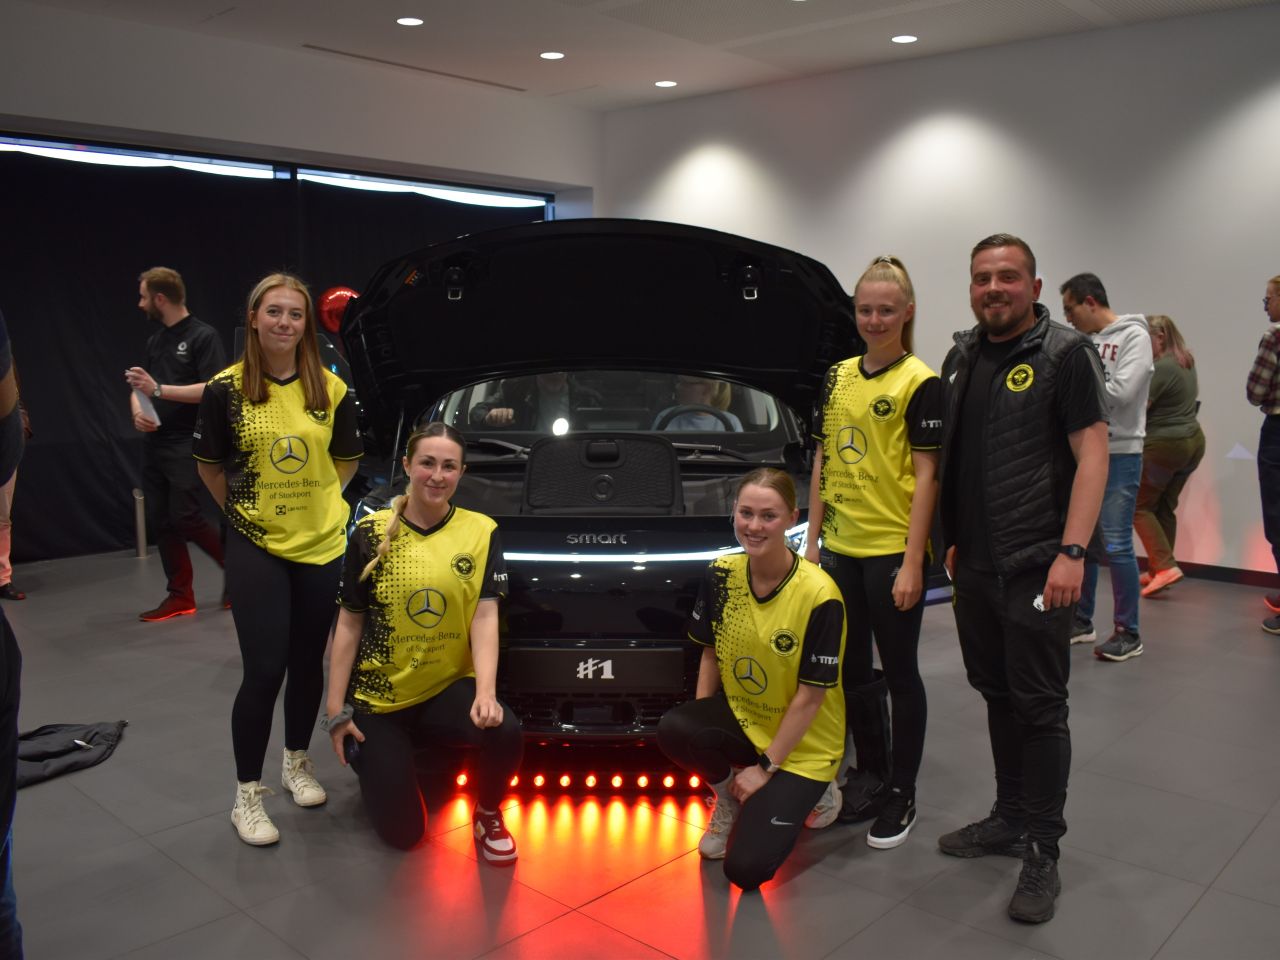 LSH Auto UK unveils the smart #1 at Mercedes-Benz of Stockport launch event